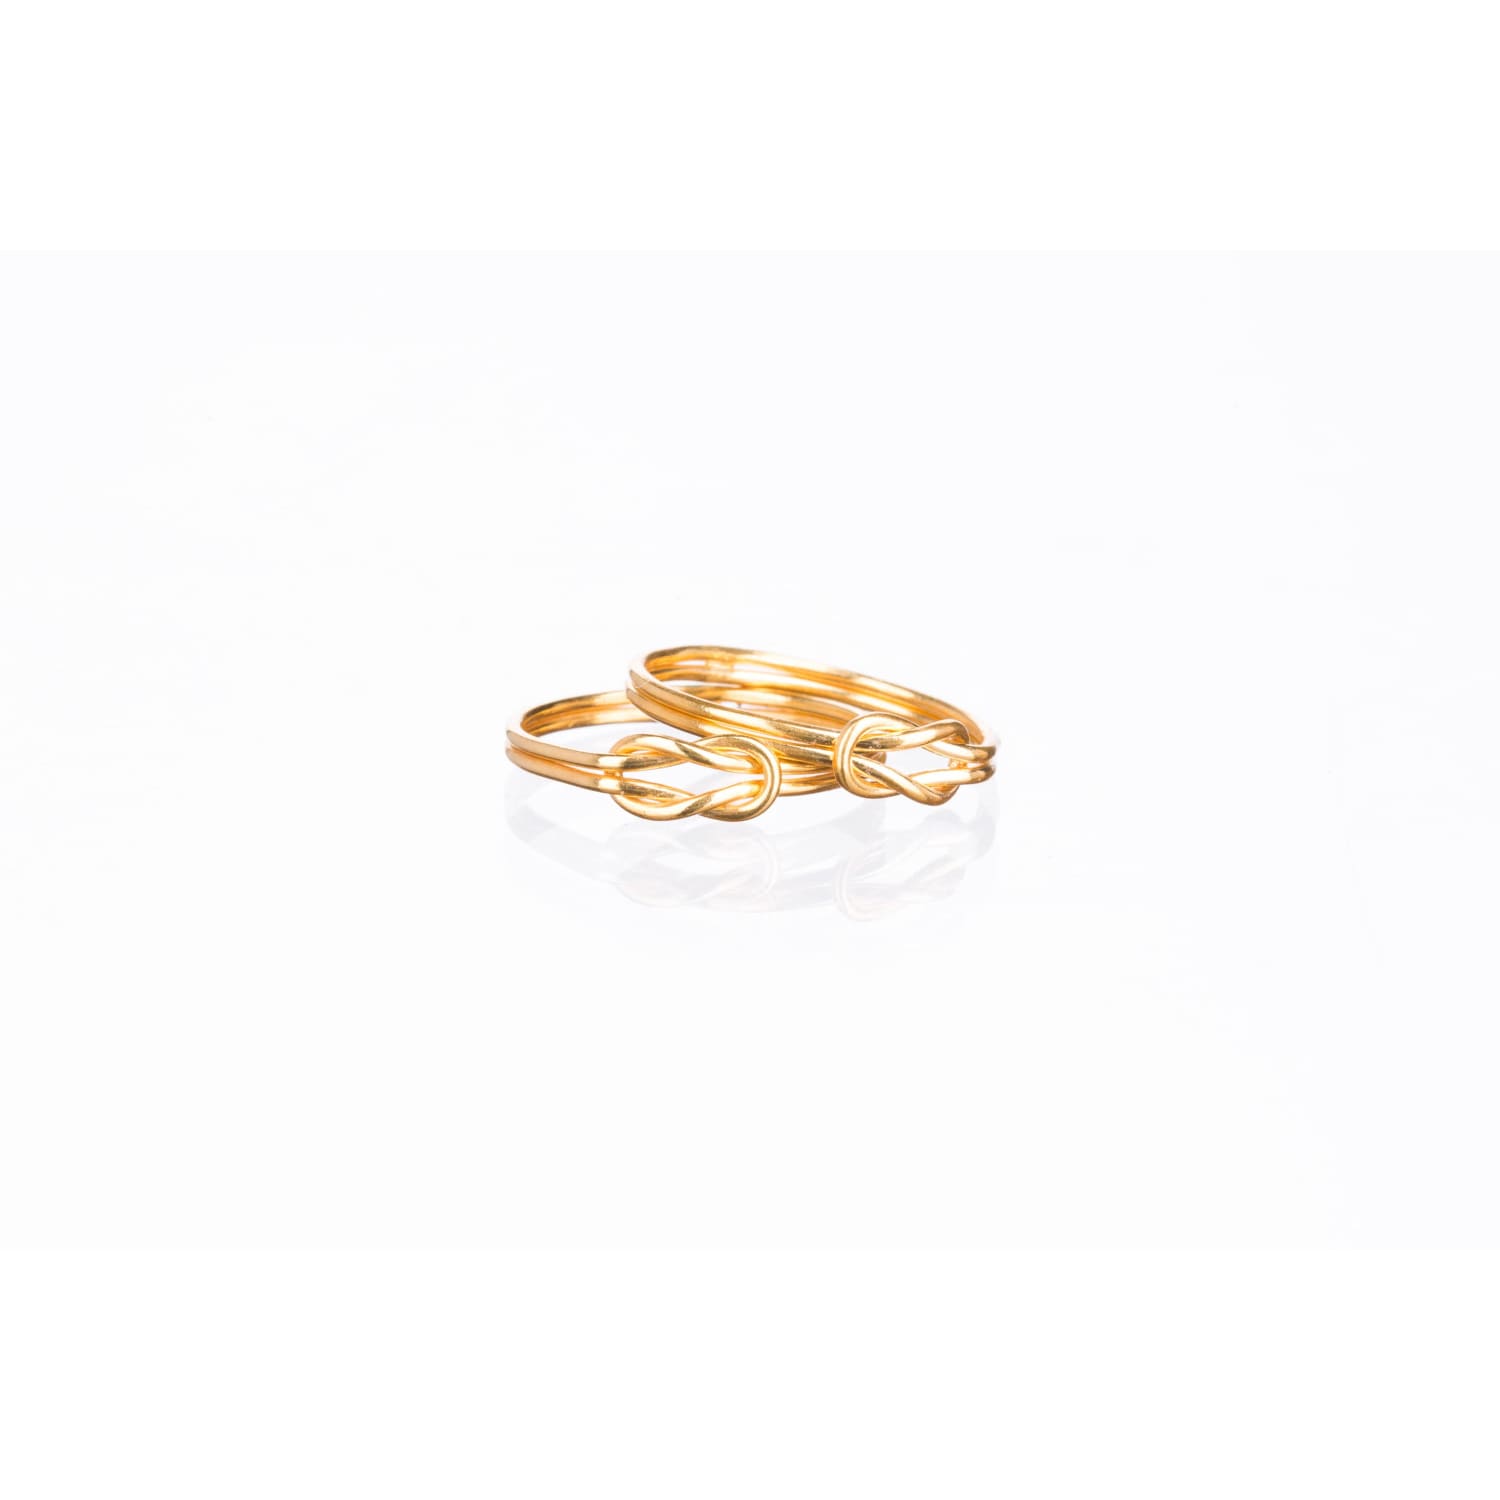 Long Love Knot Ring in Gold Fill Raw Gemstone Jewelry Rough